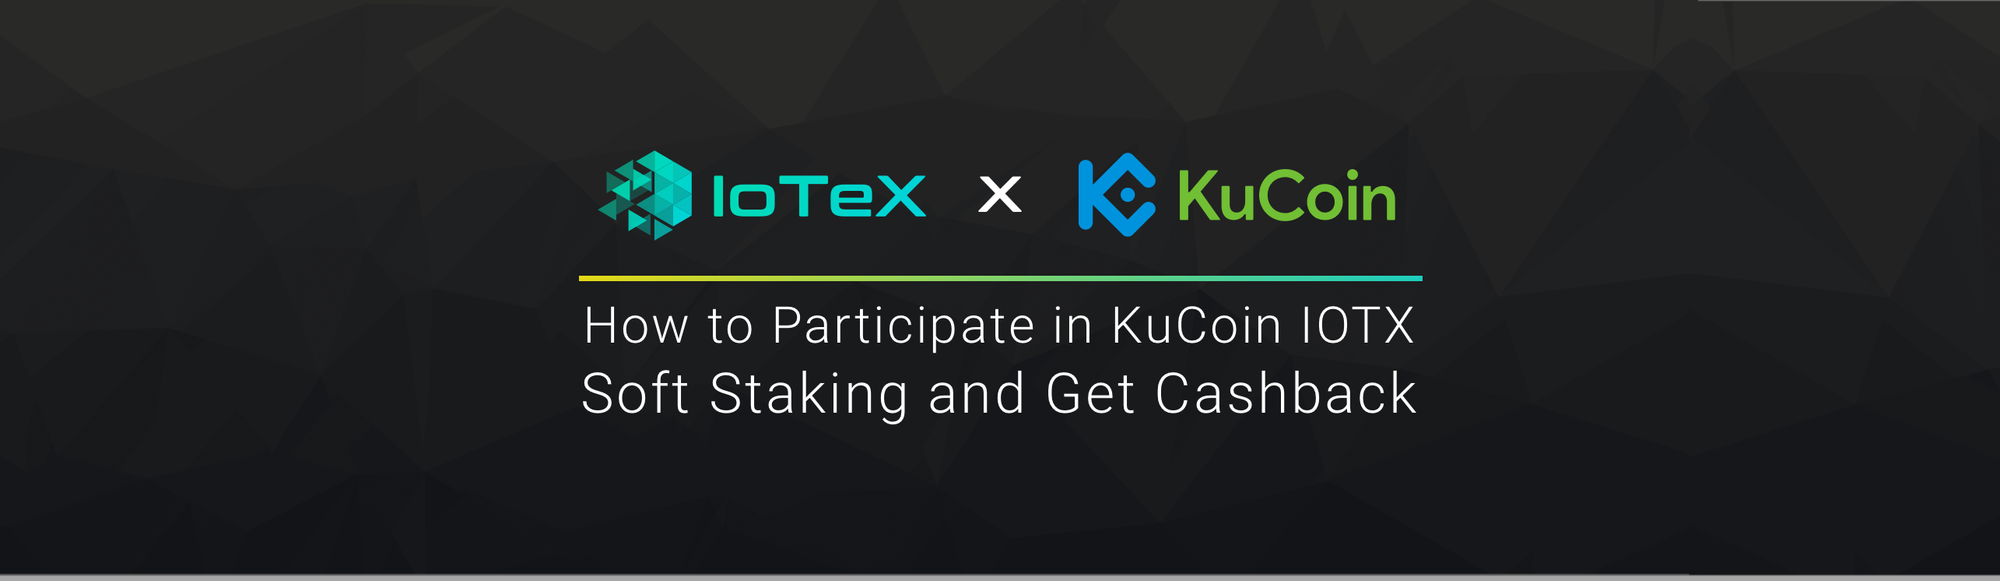 How to Participate in KuCoin IOTX Soft Staking and Get Cashback